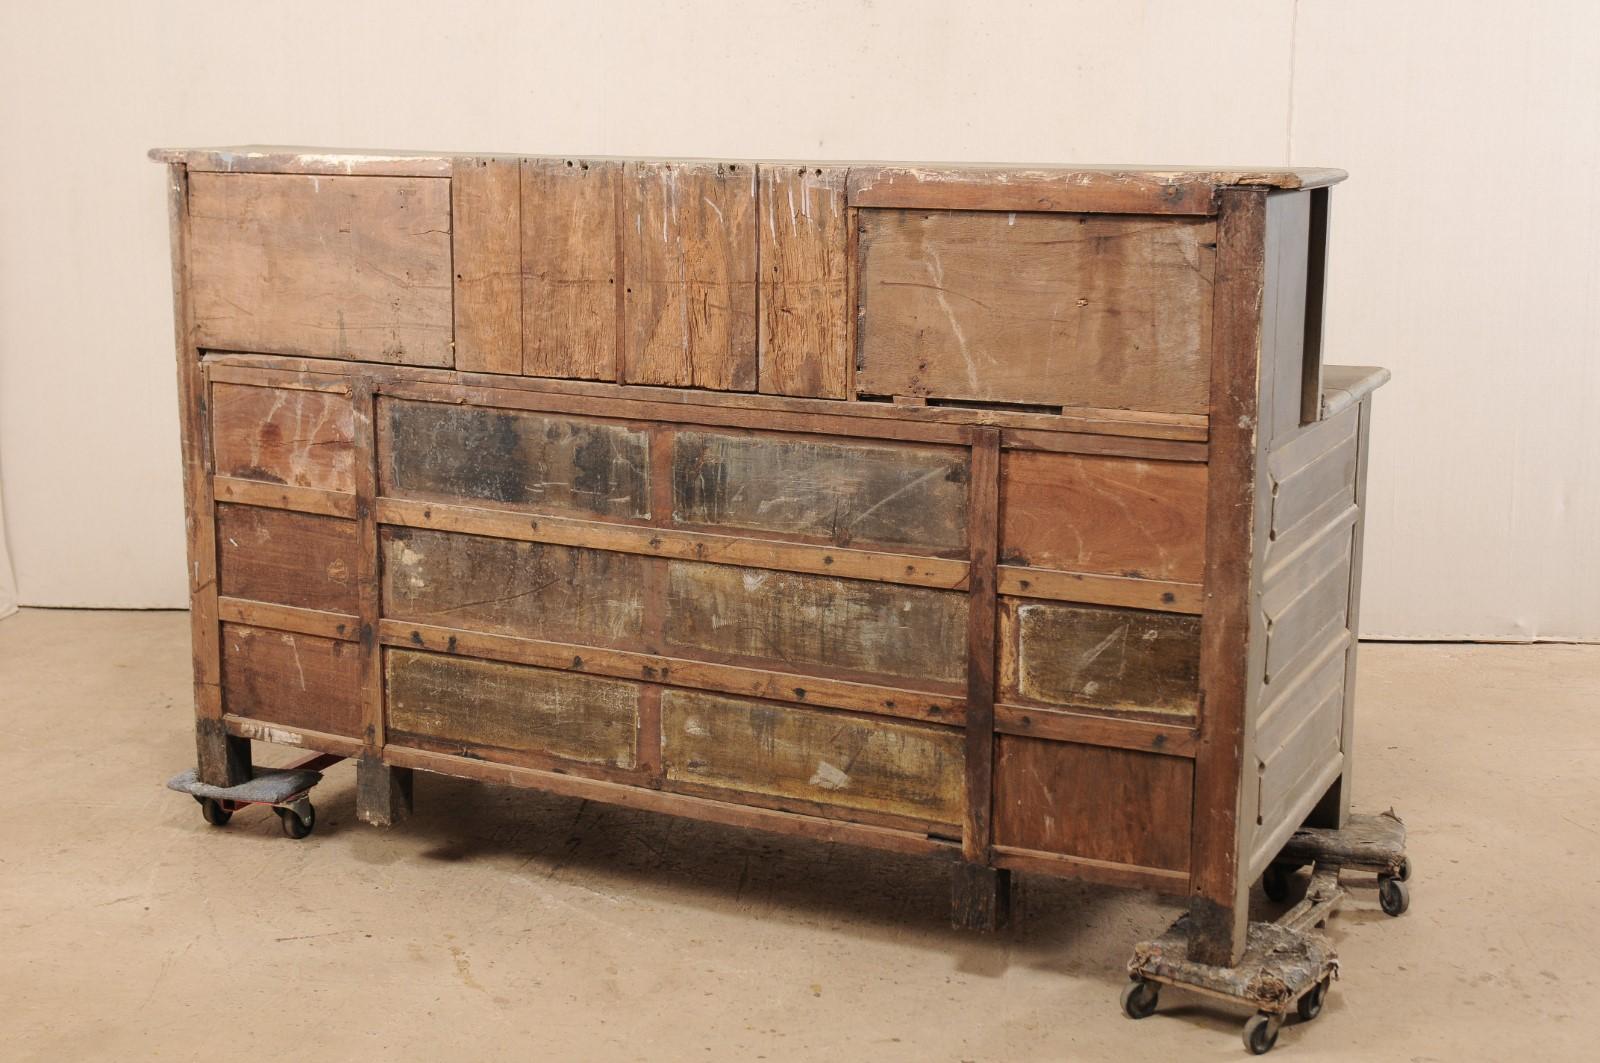 A Portuguese Colonial Refectory Cabinet with Wonderful Storage, Early 20th C. For Sale 4